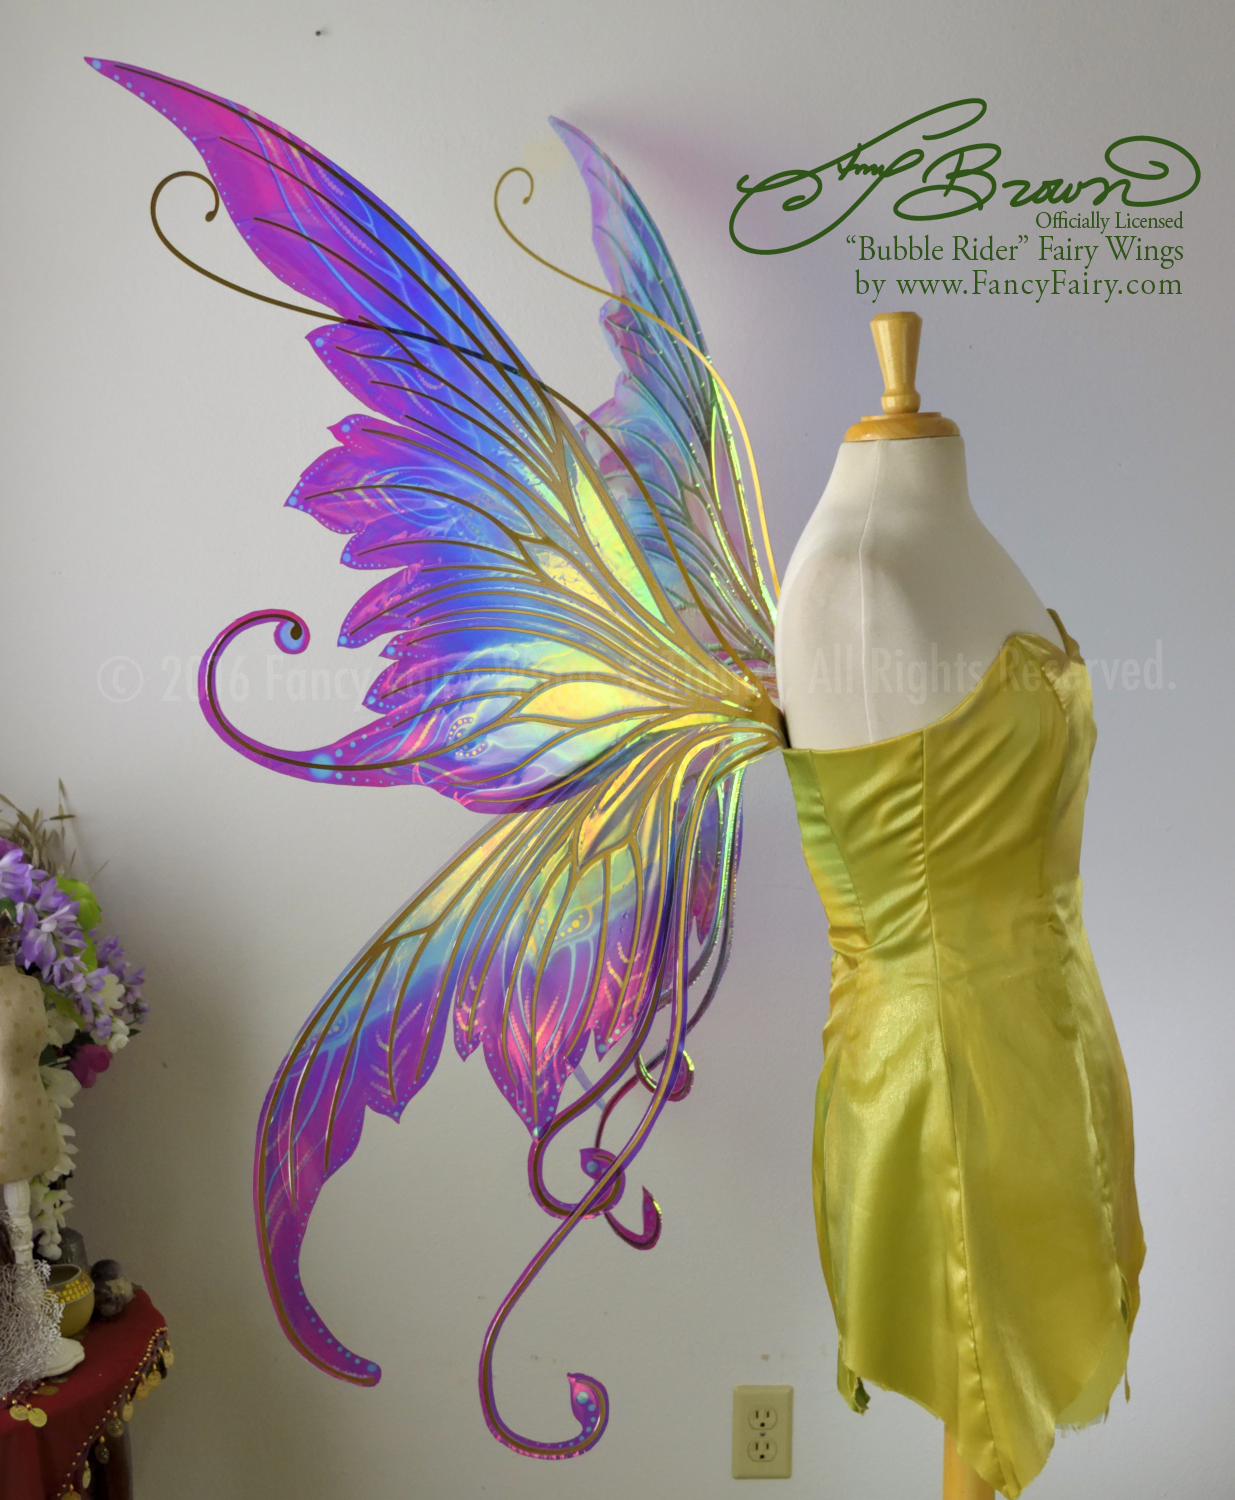 Giant Amy Brown Bubble Rider Iridescent Fairy Wings Painted in Acid Rainbow style with Gold veins